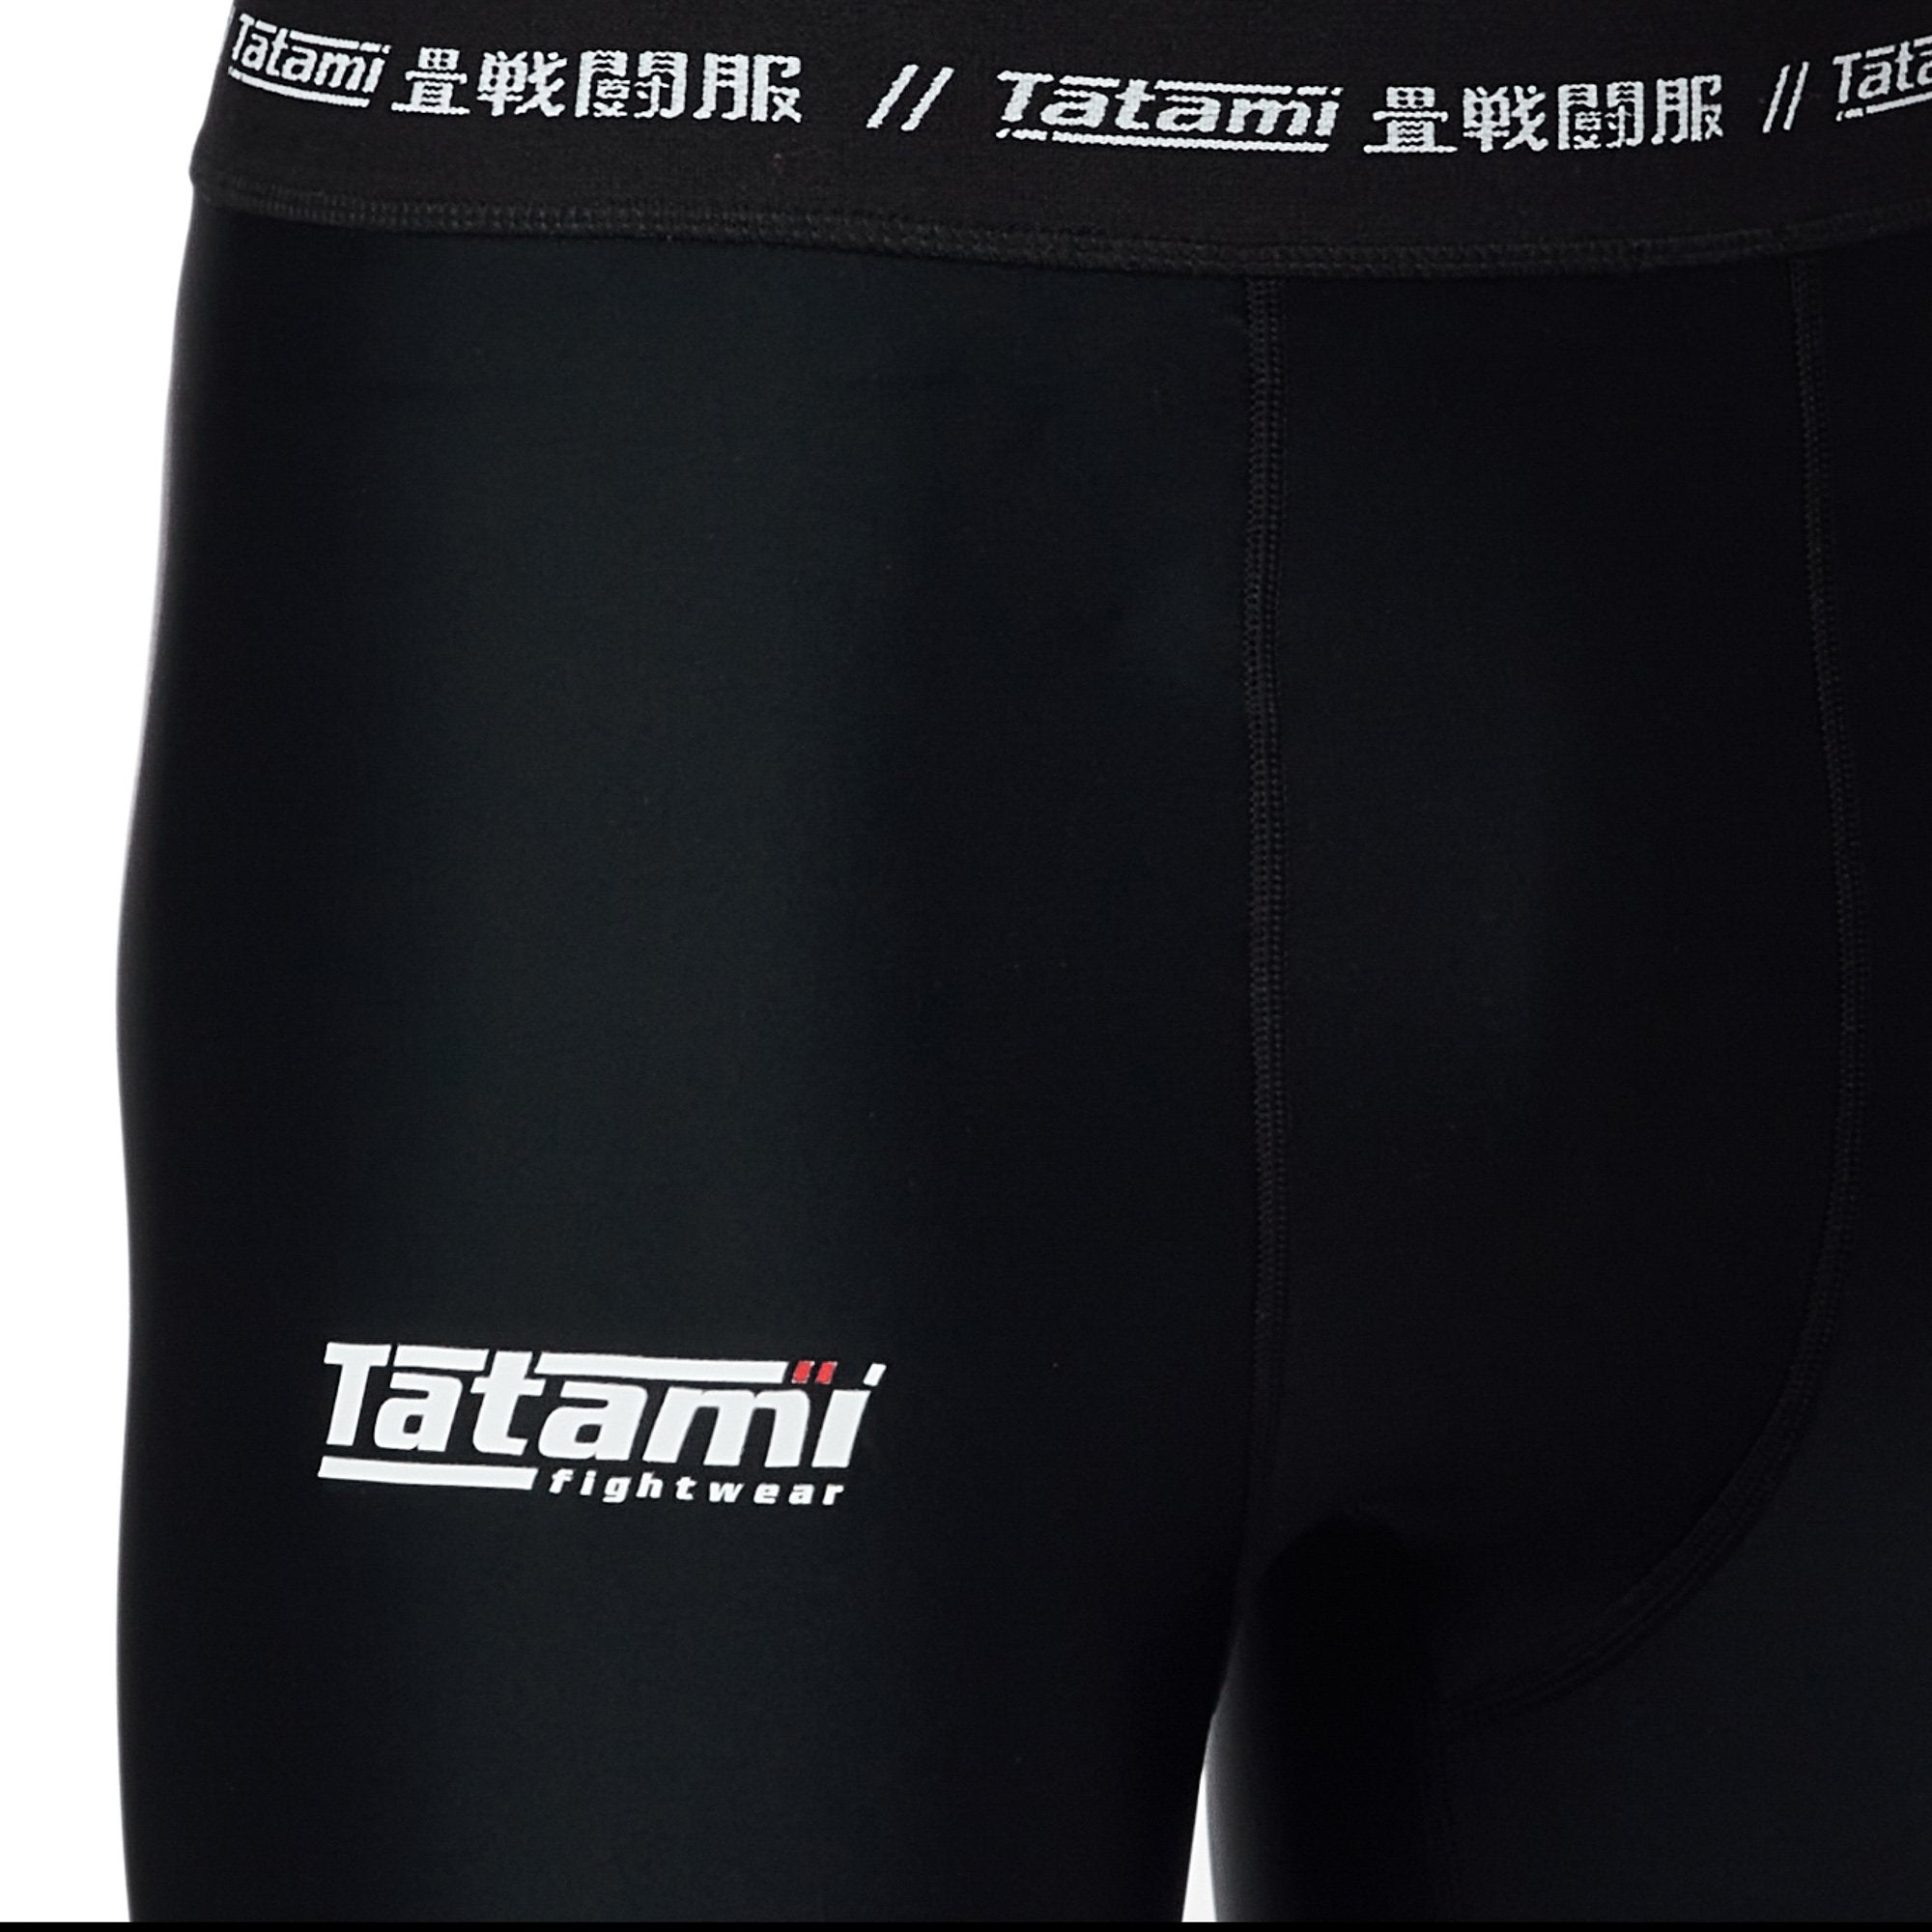 Red Label 2.0 Grappling Spats - Black